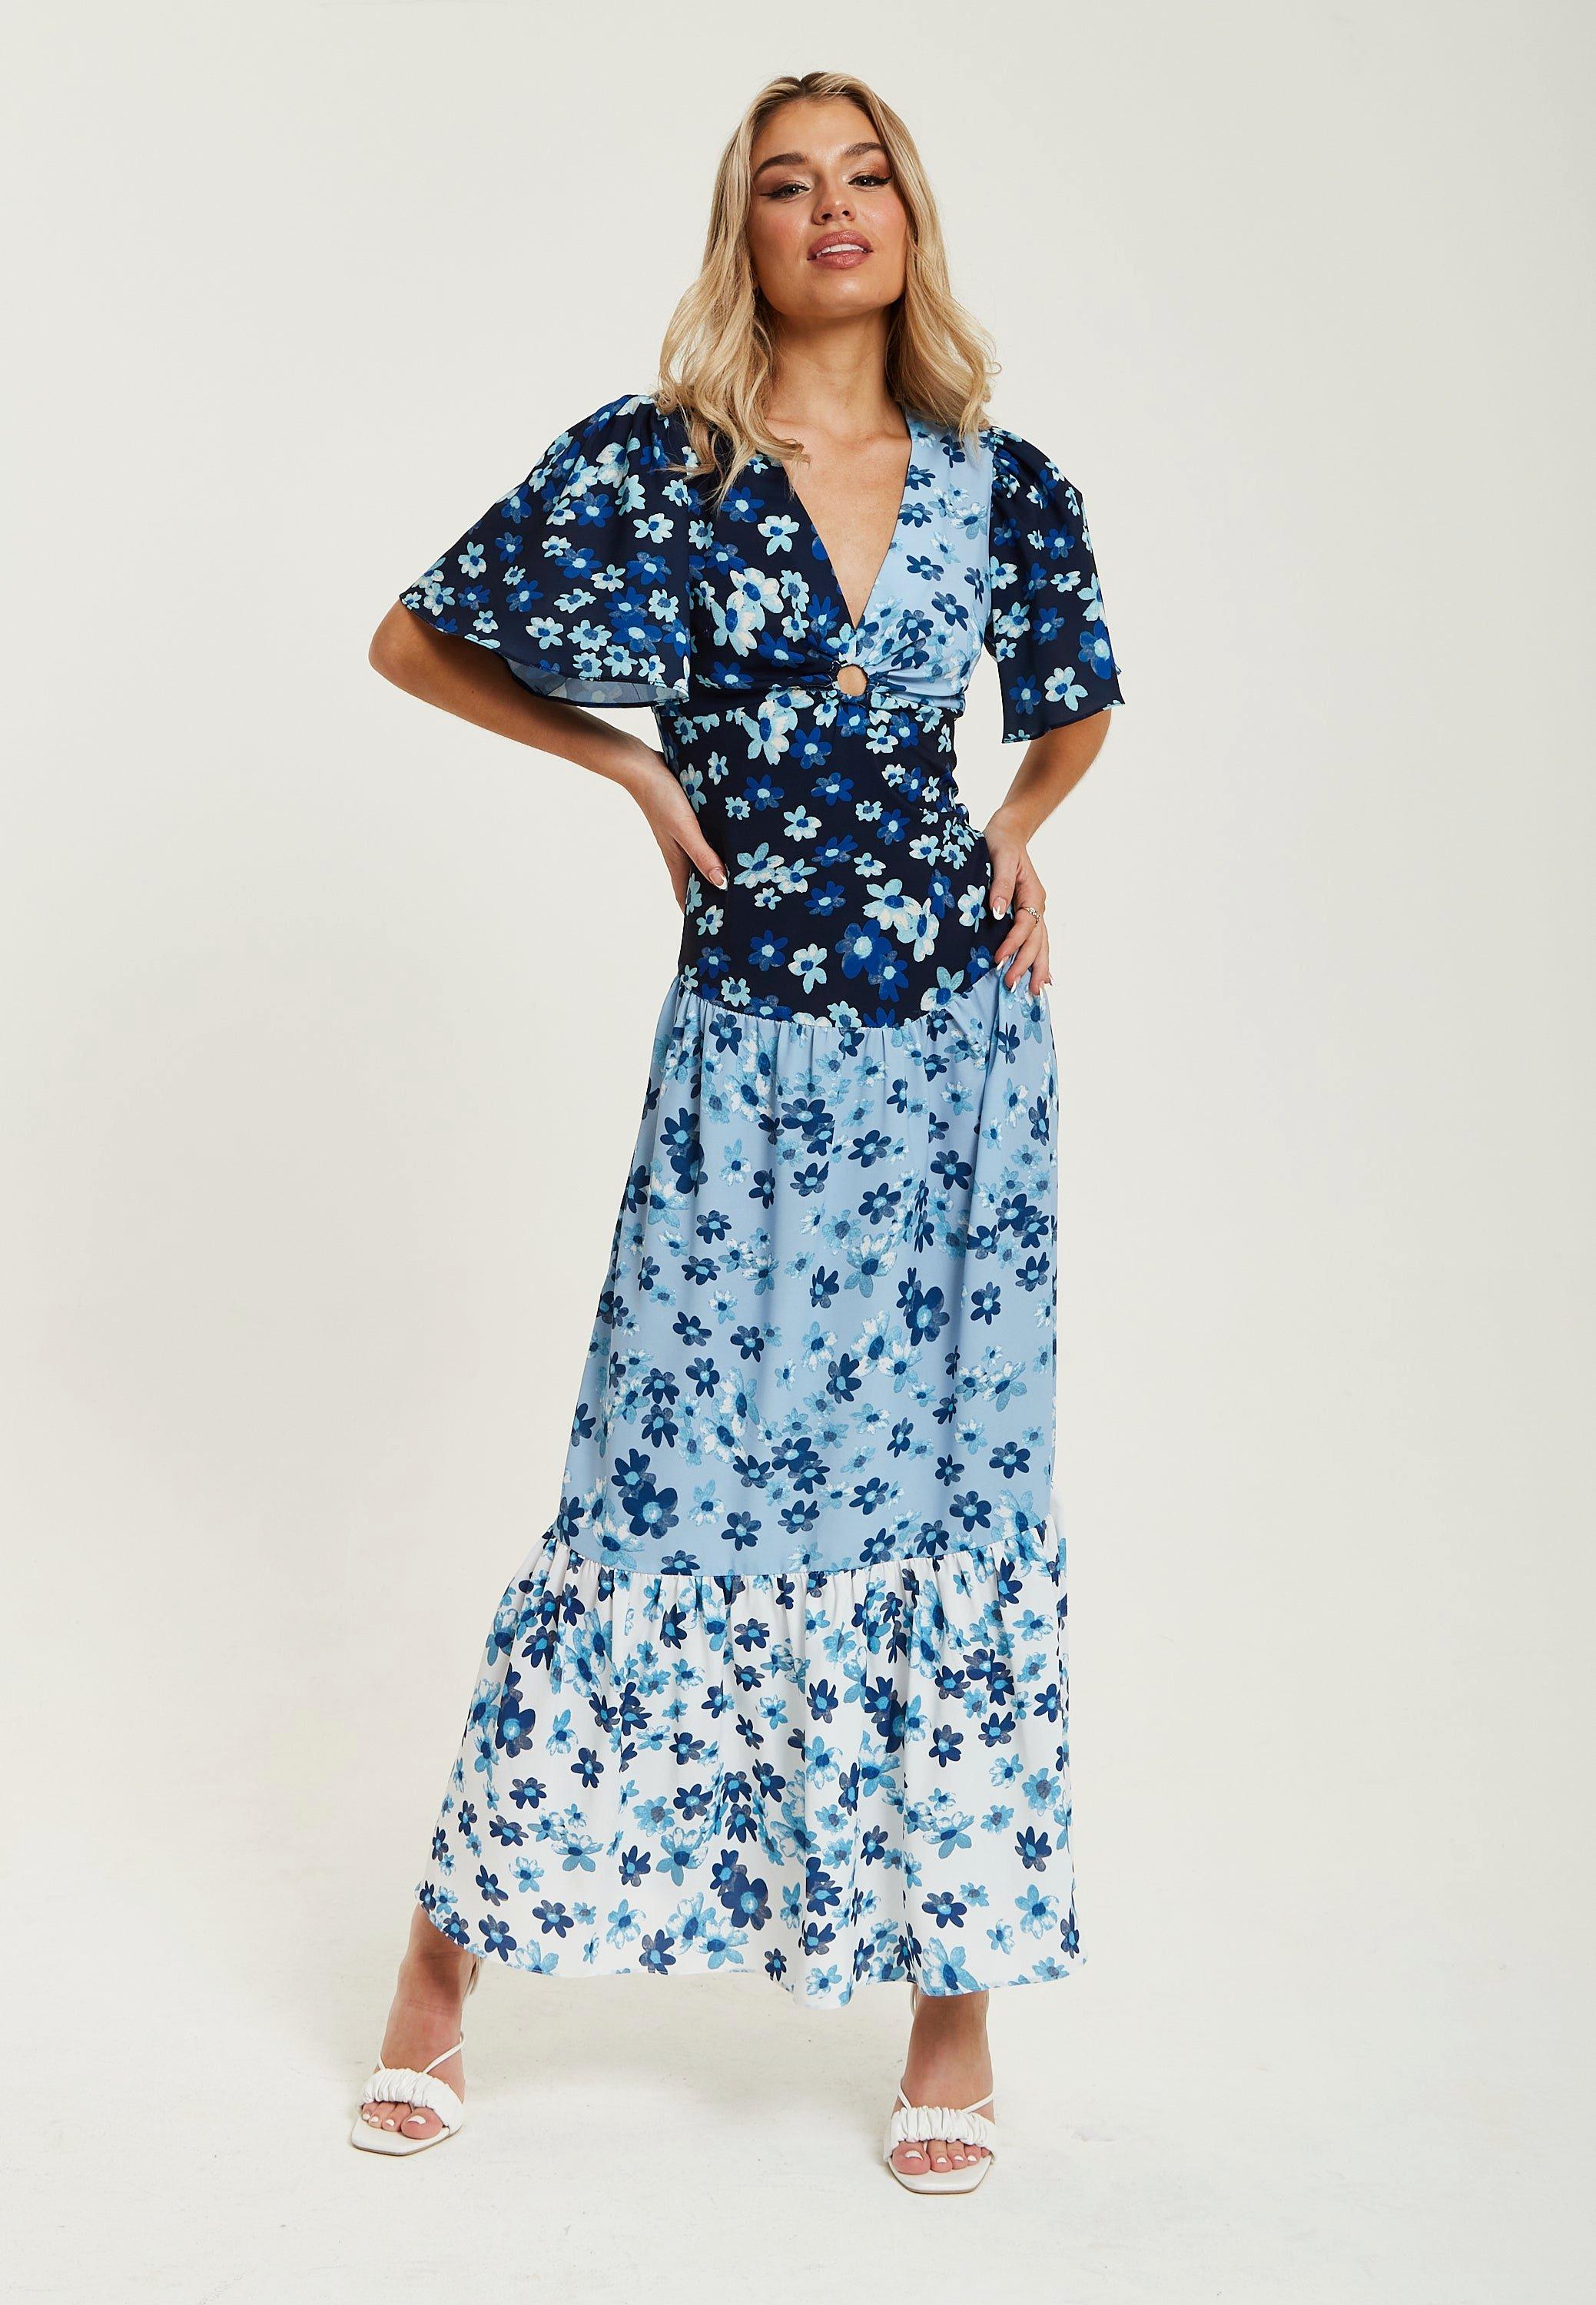 Floral Print Midi Dress in Blue, Navy and White